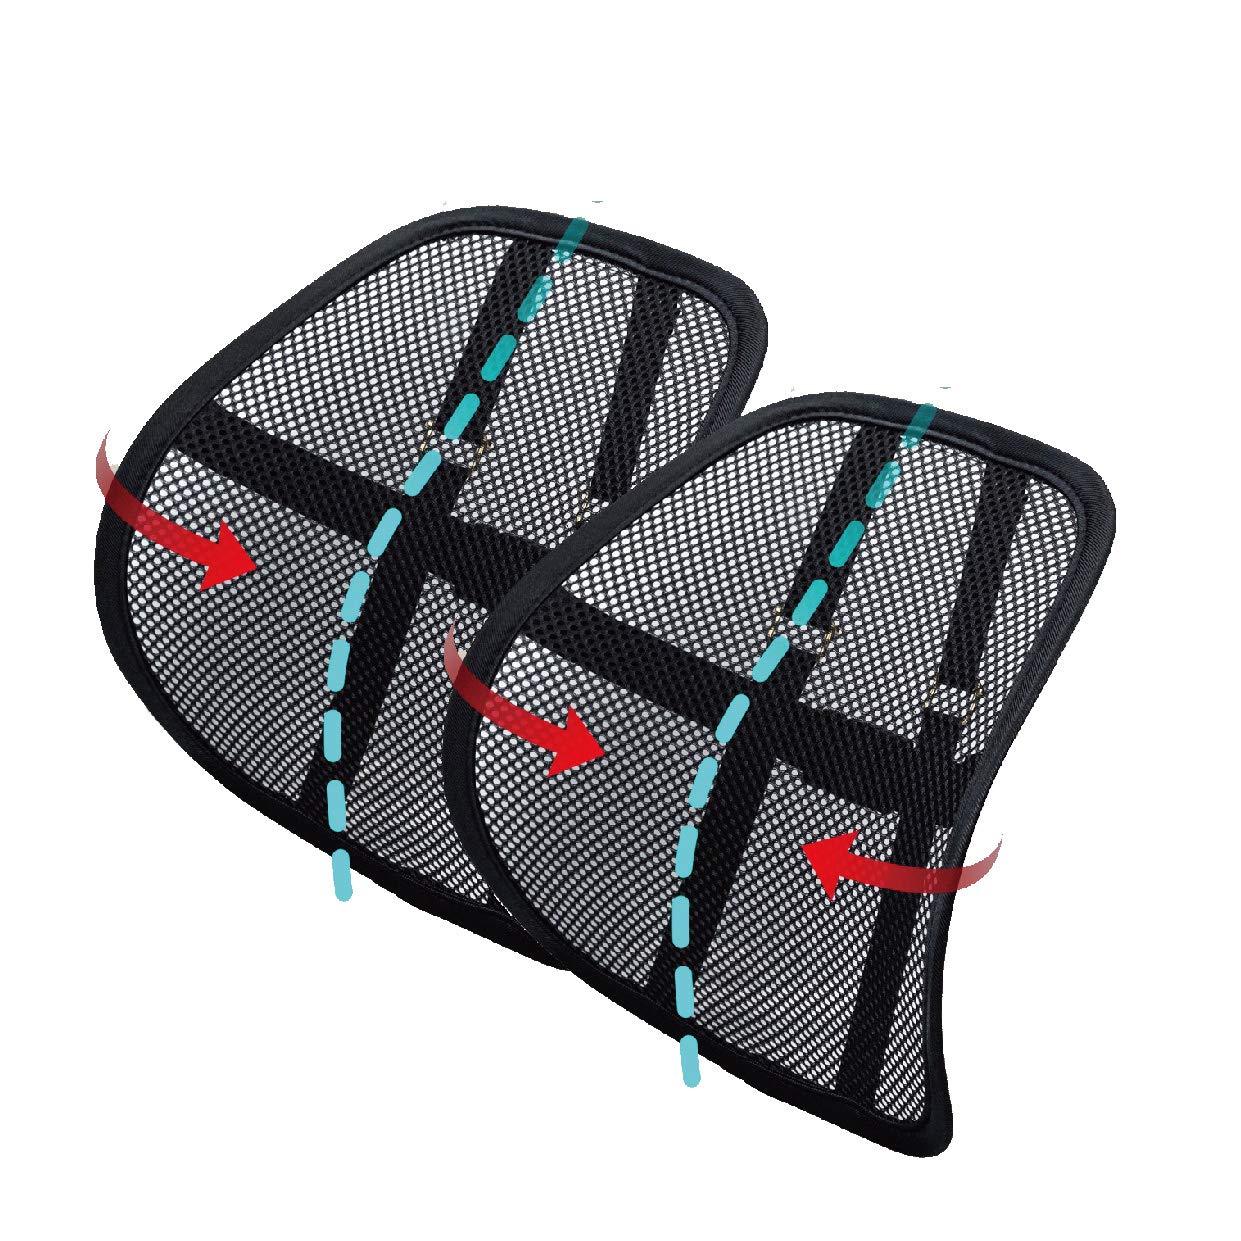 Casewin Black Lumbar Mesh Back Brace Support Office Home Car Seat Chair  Ventilate Cool Cushion Pad with Massage